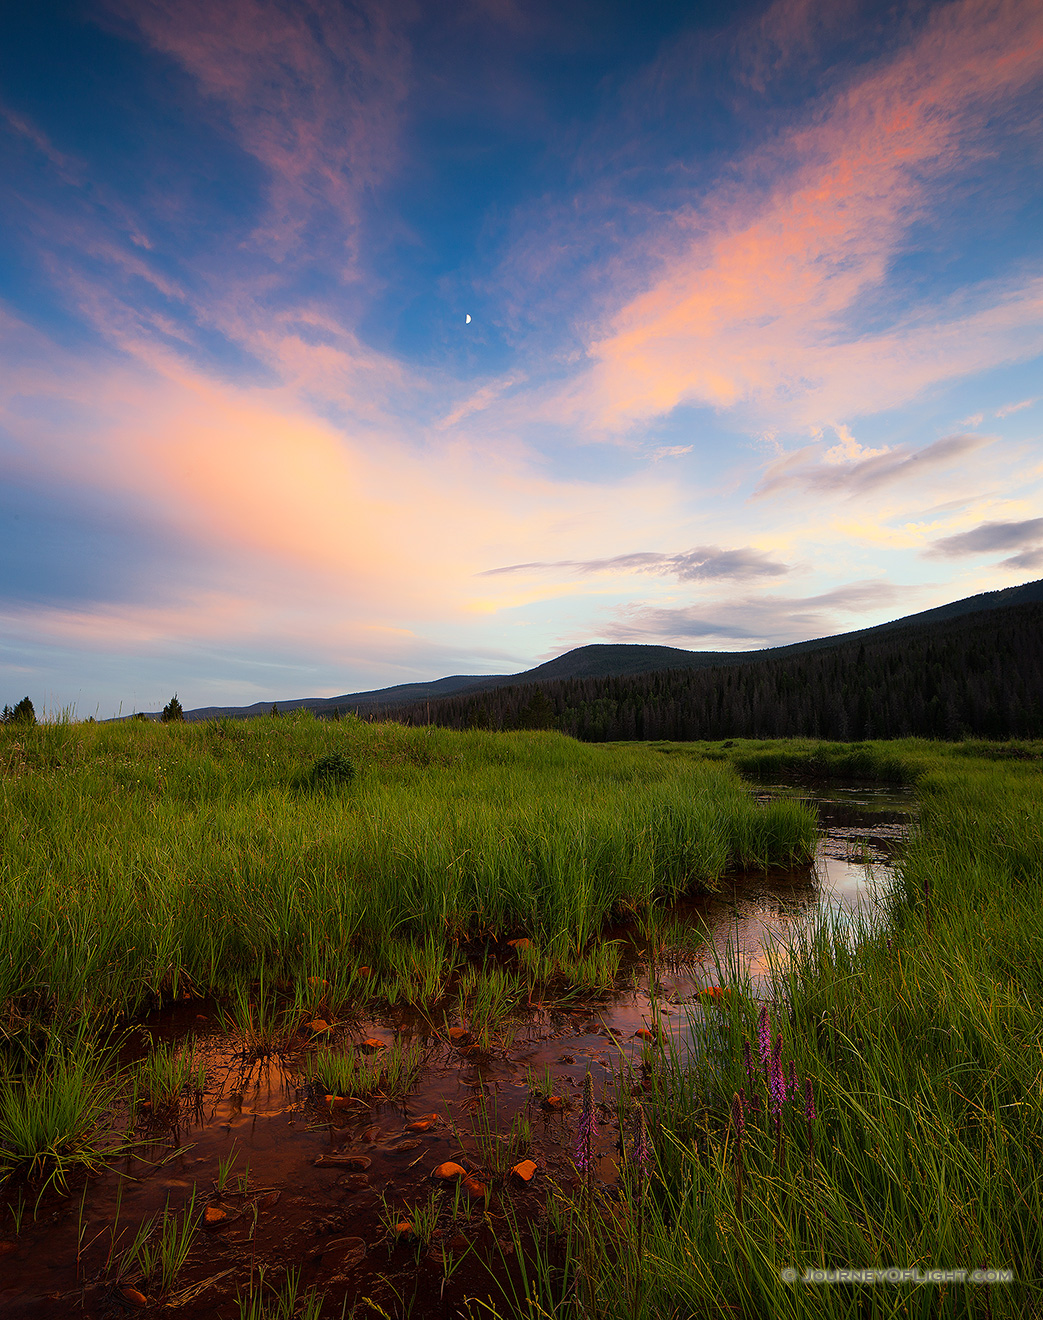 The Kawuneeche Valley is a marshy meadow area on the western side of Rocky Mountain National Park in Colorado. In the native Arapaho language Kawuneeche means valley of the coyote and indeed, many animals are found traveling through the valley. On this still July evening, there was a herd of elk that had quietly moved through and were eating on the trail. Not wanting to disturb them too much I kindly asked them to move as I slowly walked by. They obliged and I was on my way, as the last remnants of light illuminated the western edge of the clouds casting a dull glow across the meadow. - Colorado Picture